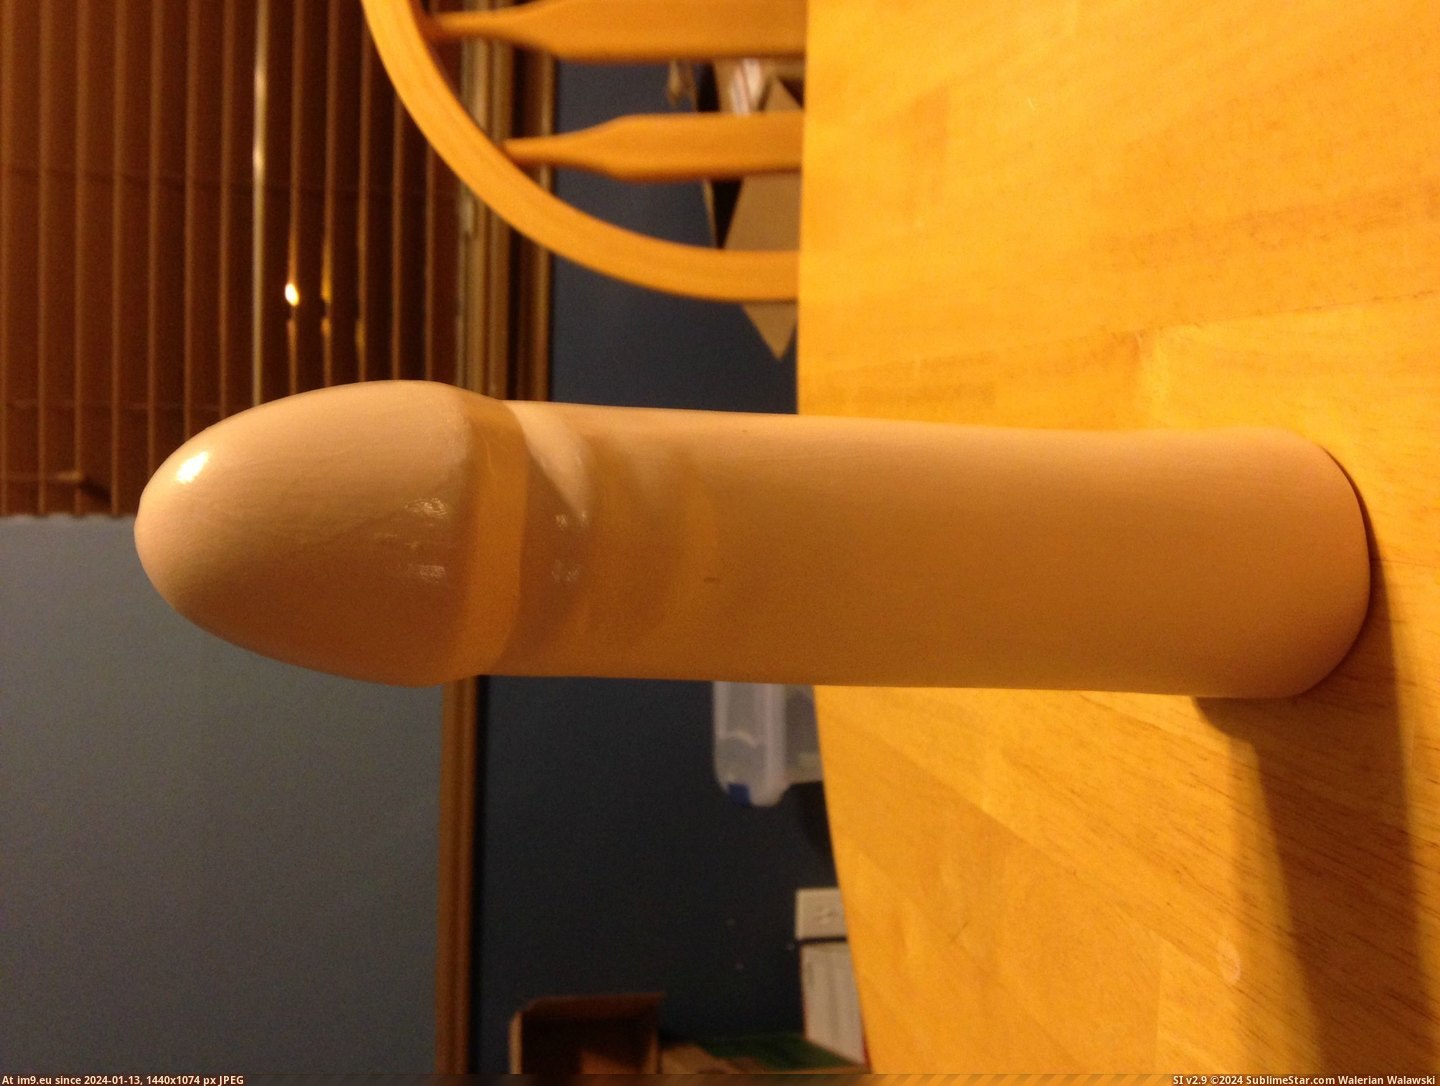 #Wtf #Art #Great #Out #Penis #Gave #Grandmother #Gifts #Got #She #Family #Boyfriend [Wtf] My Great-Grandmother got a boyfriend...so she made this penis art and gave it out as gifts to the family. [NSFW] 3 Pic. (Image of album My r/WTF favs))